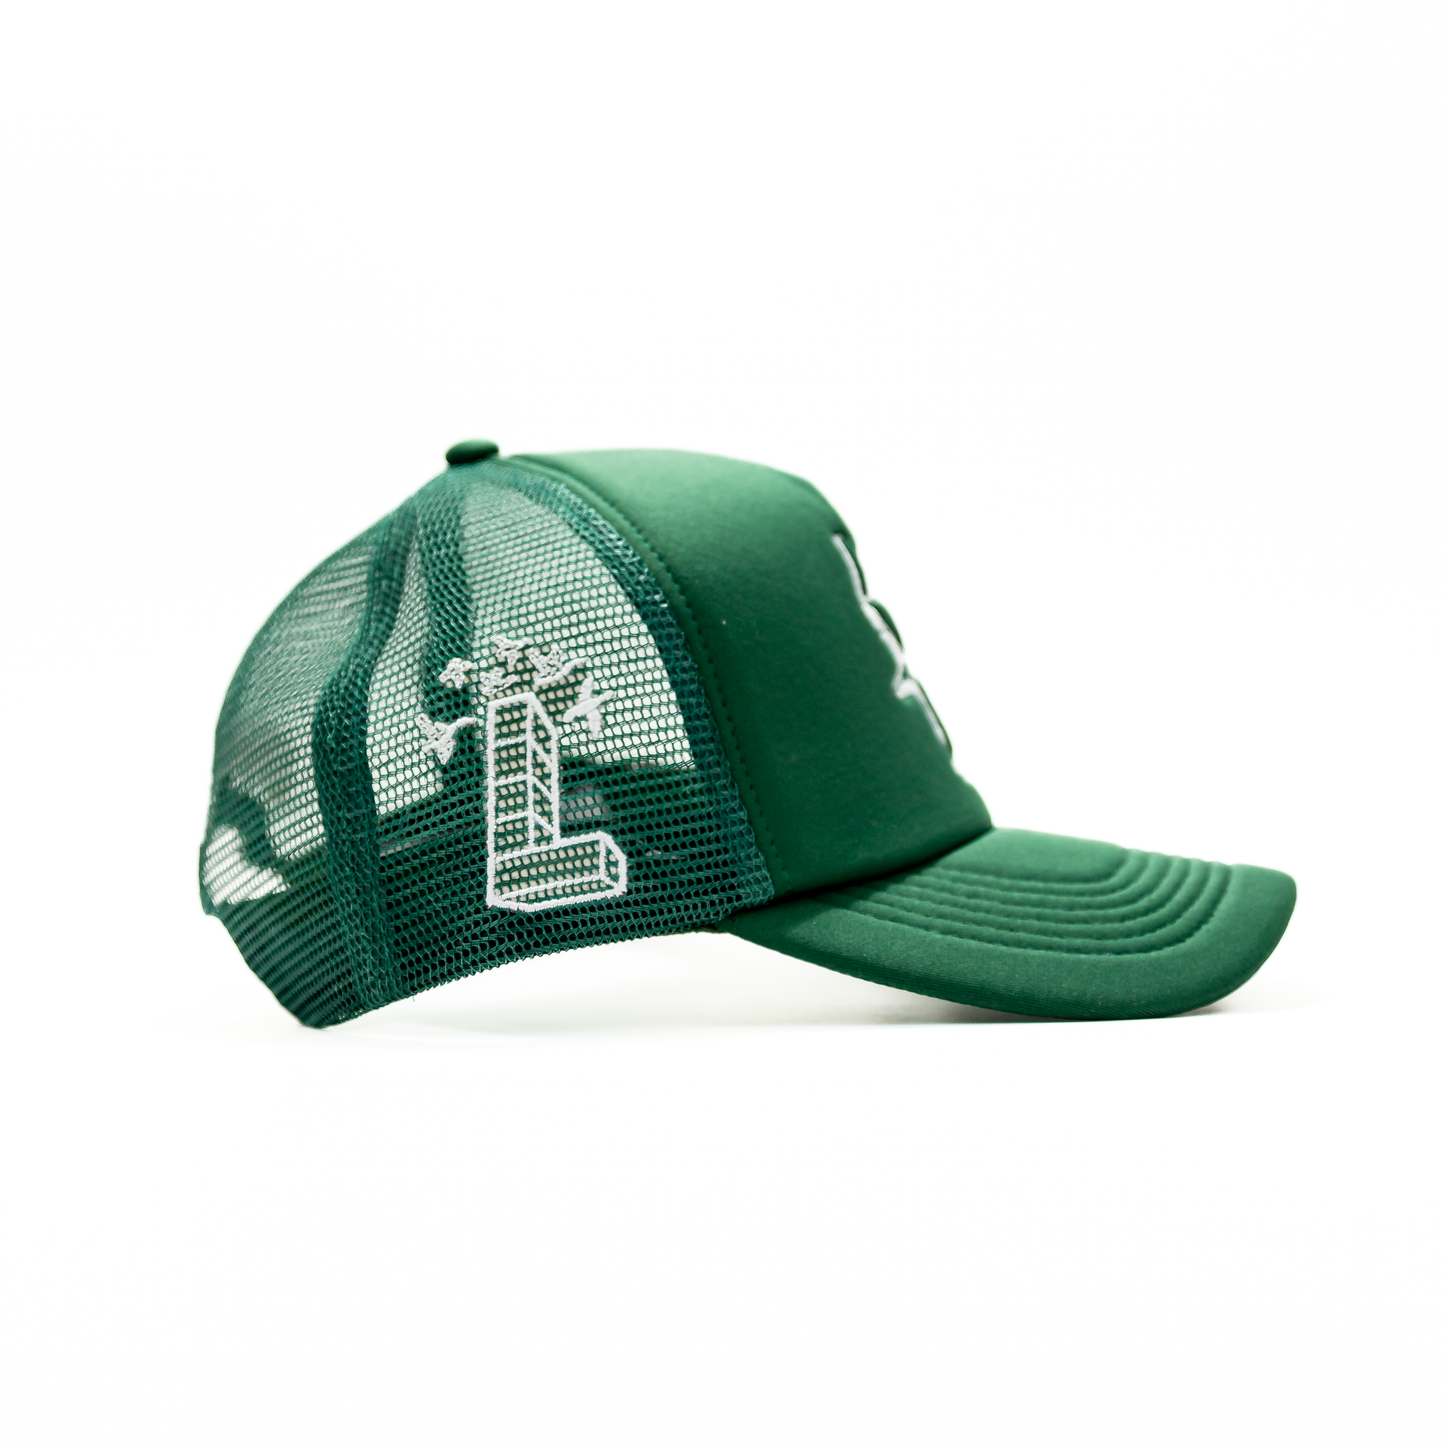 Flying Duck Trucker Hat, Green / White - Layr Official